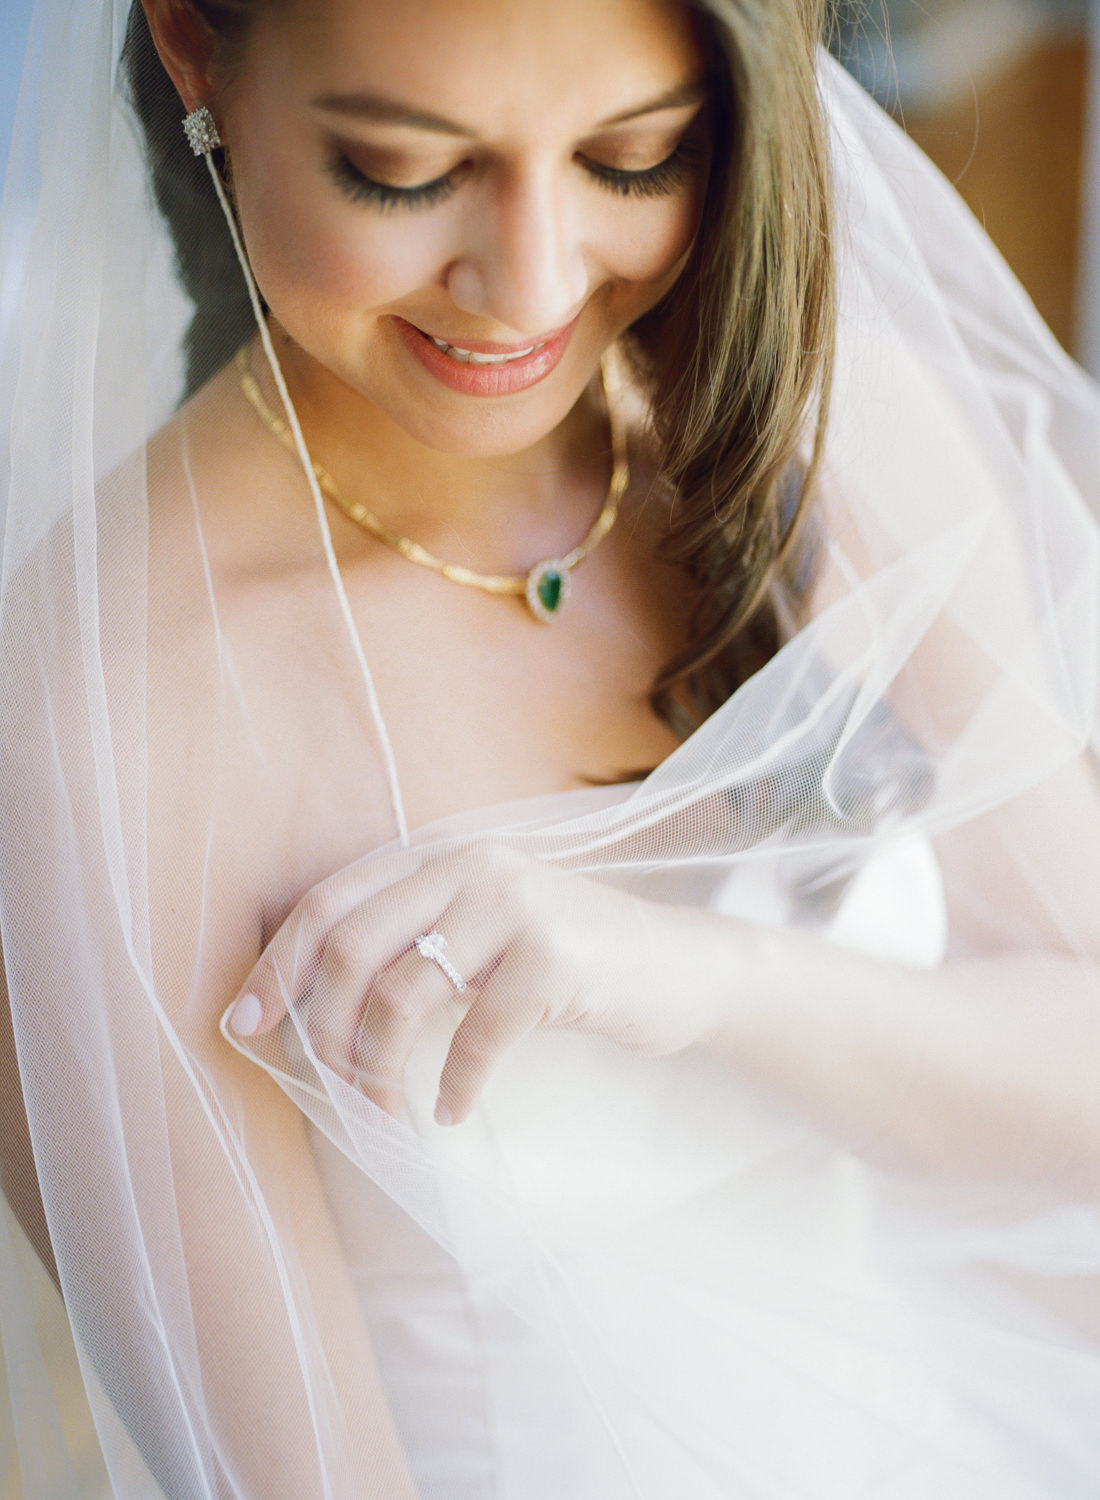 Bridal portrait with veil and ring; St. Louis fine art film wedding photographer Erica Robnett Photography